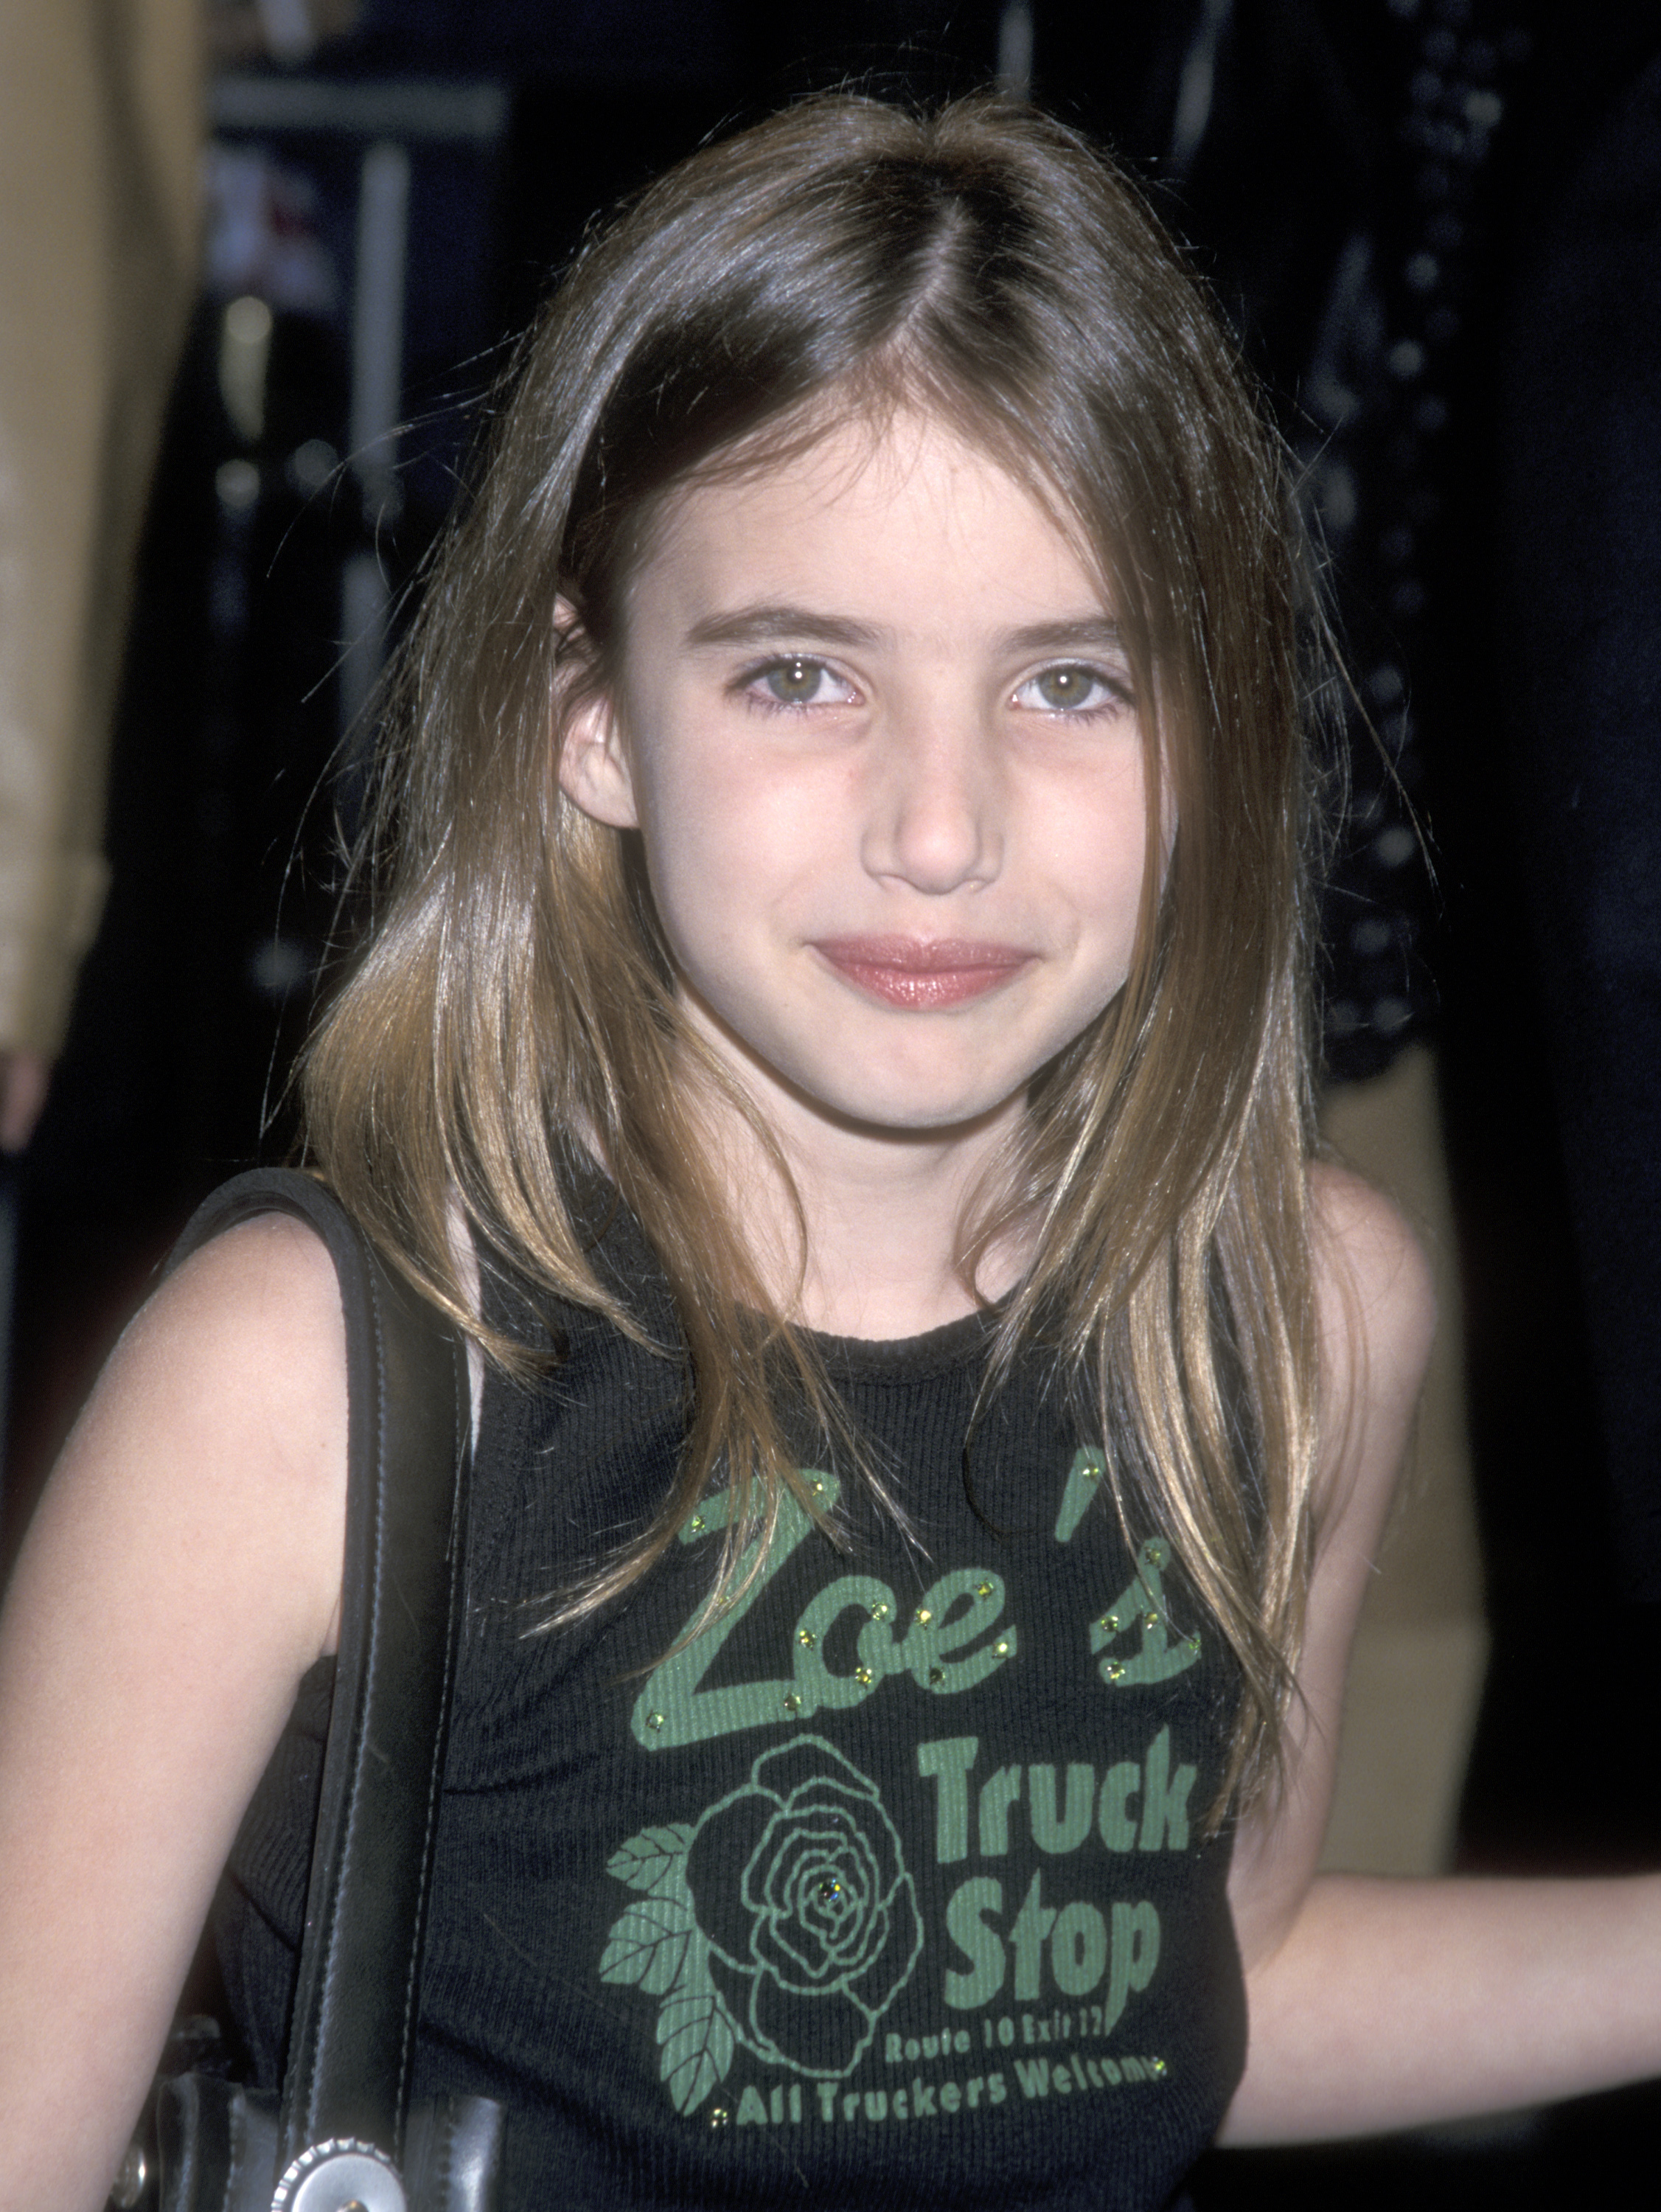 Emma Roberts at the premiere of "Blow" in Hollywood, California on March 29, 2001 | Source: Getty Images